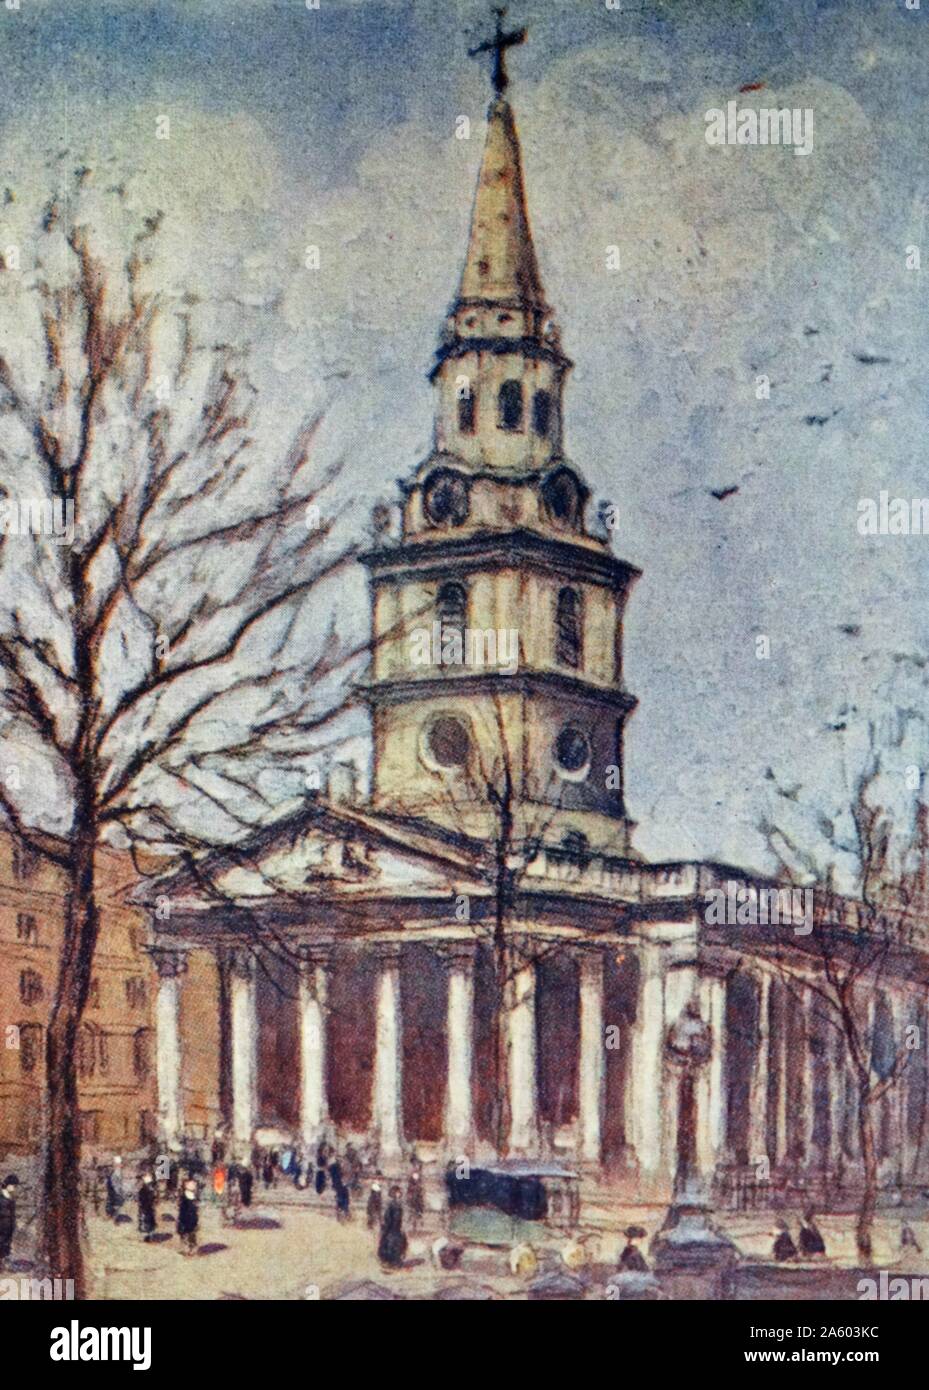 Coloured sketch of St Martin-in-the-Fields, an English Anglican church at the north-east corner of Trafalgar Square in the City of Westminster, London. Dated 20th Century Stock Photo